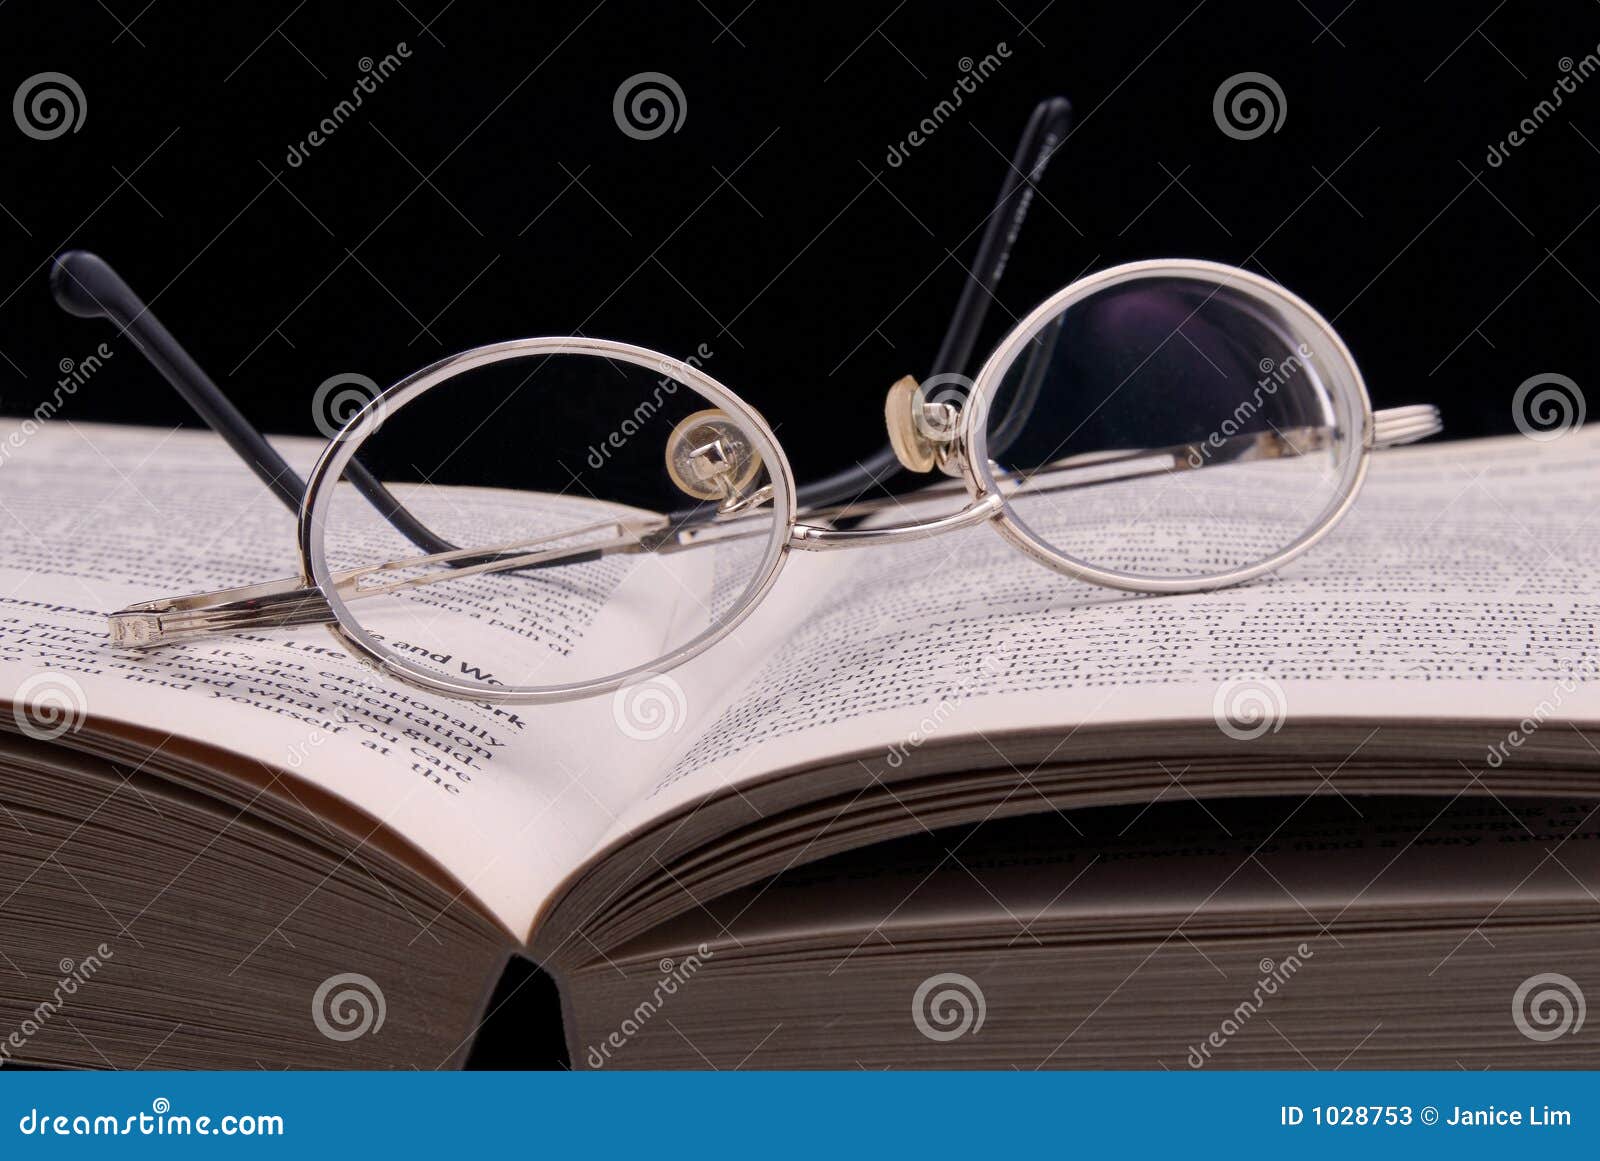 spectacle and book